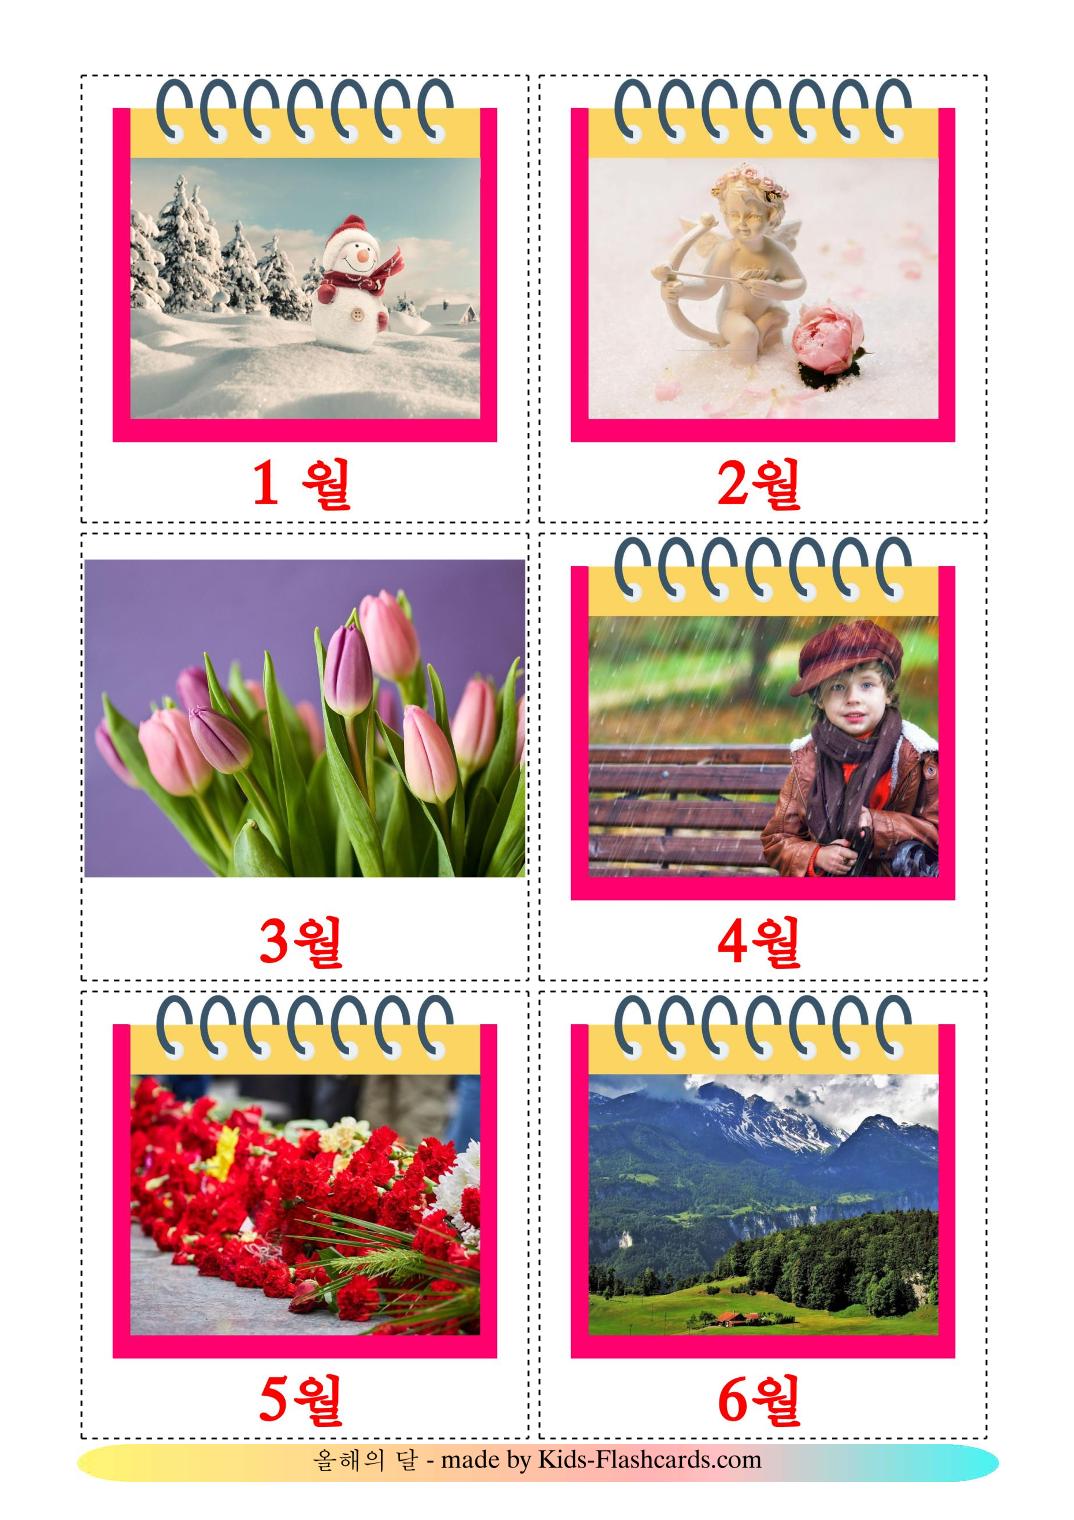 Months of the Year - 12 Free Printable korean Flashcards 